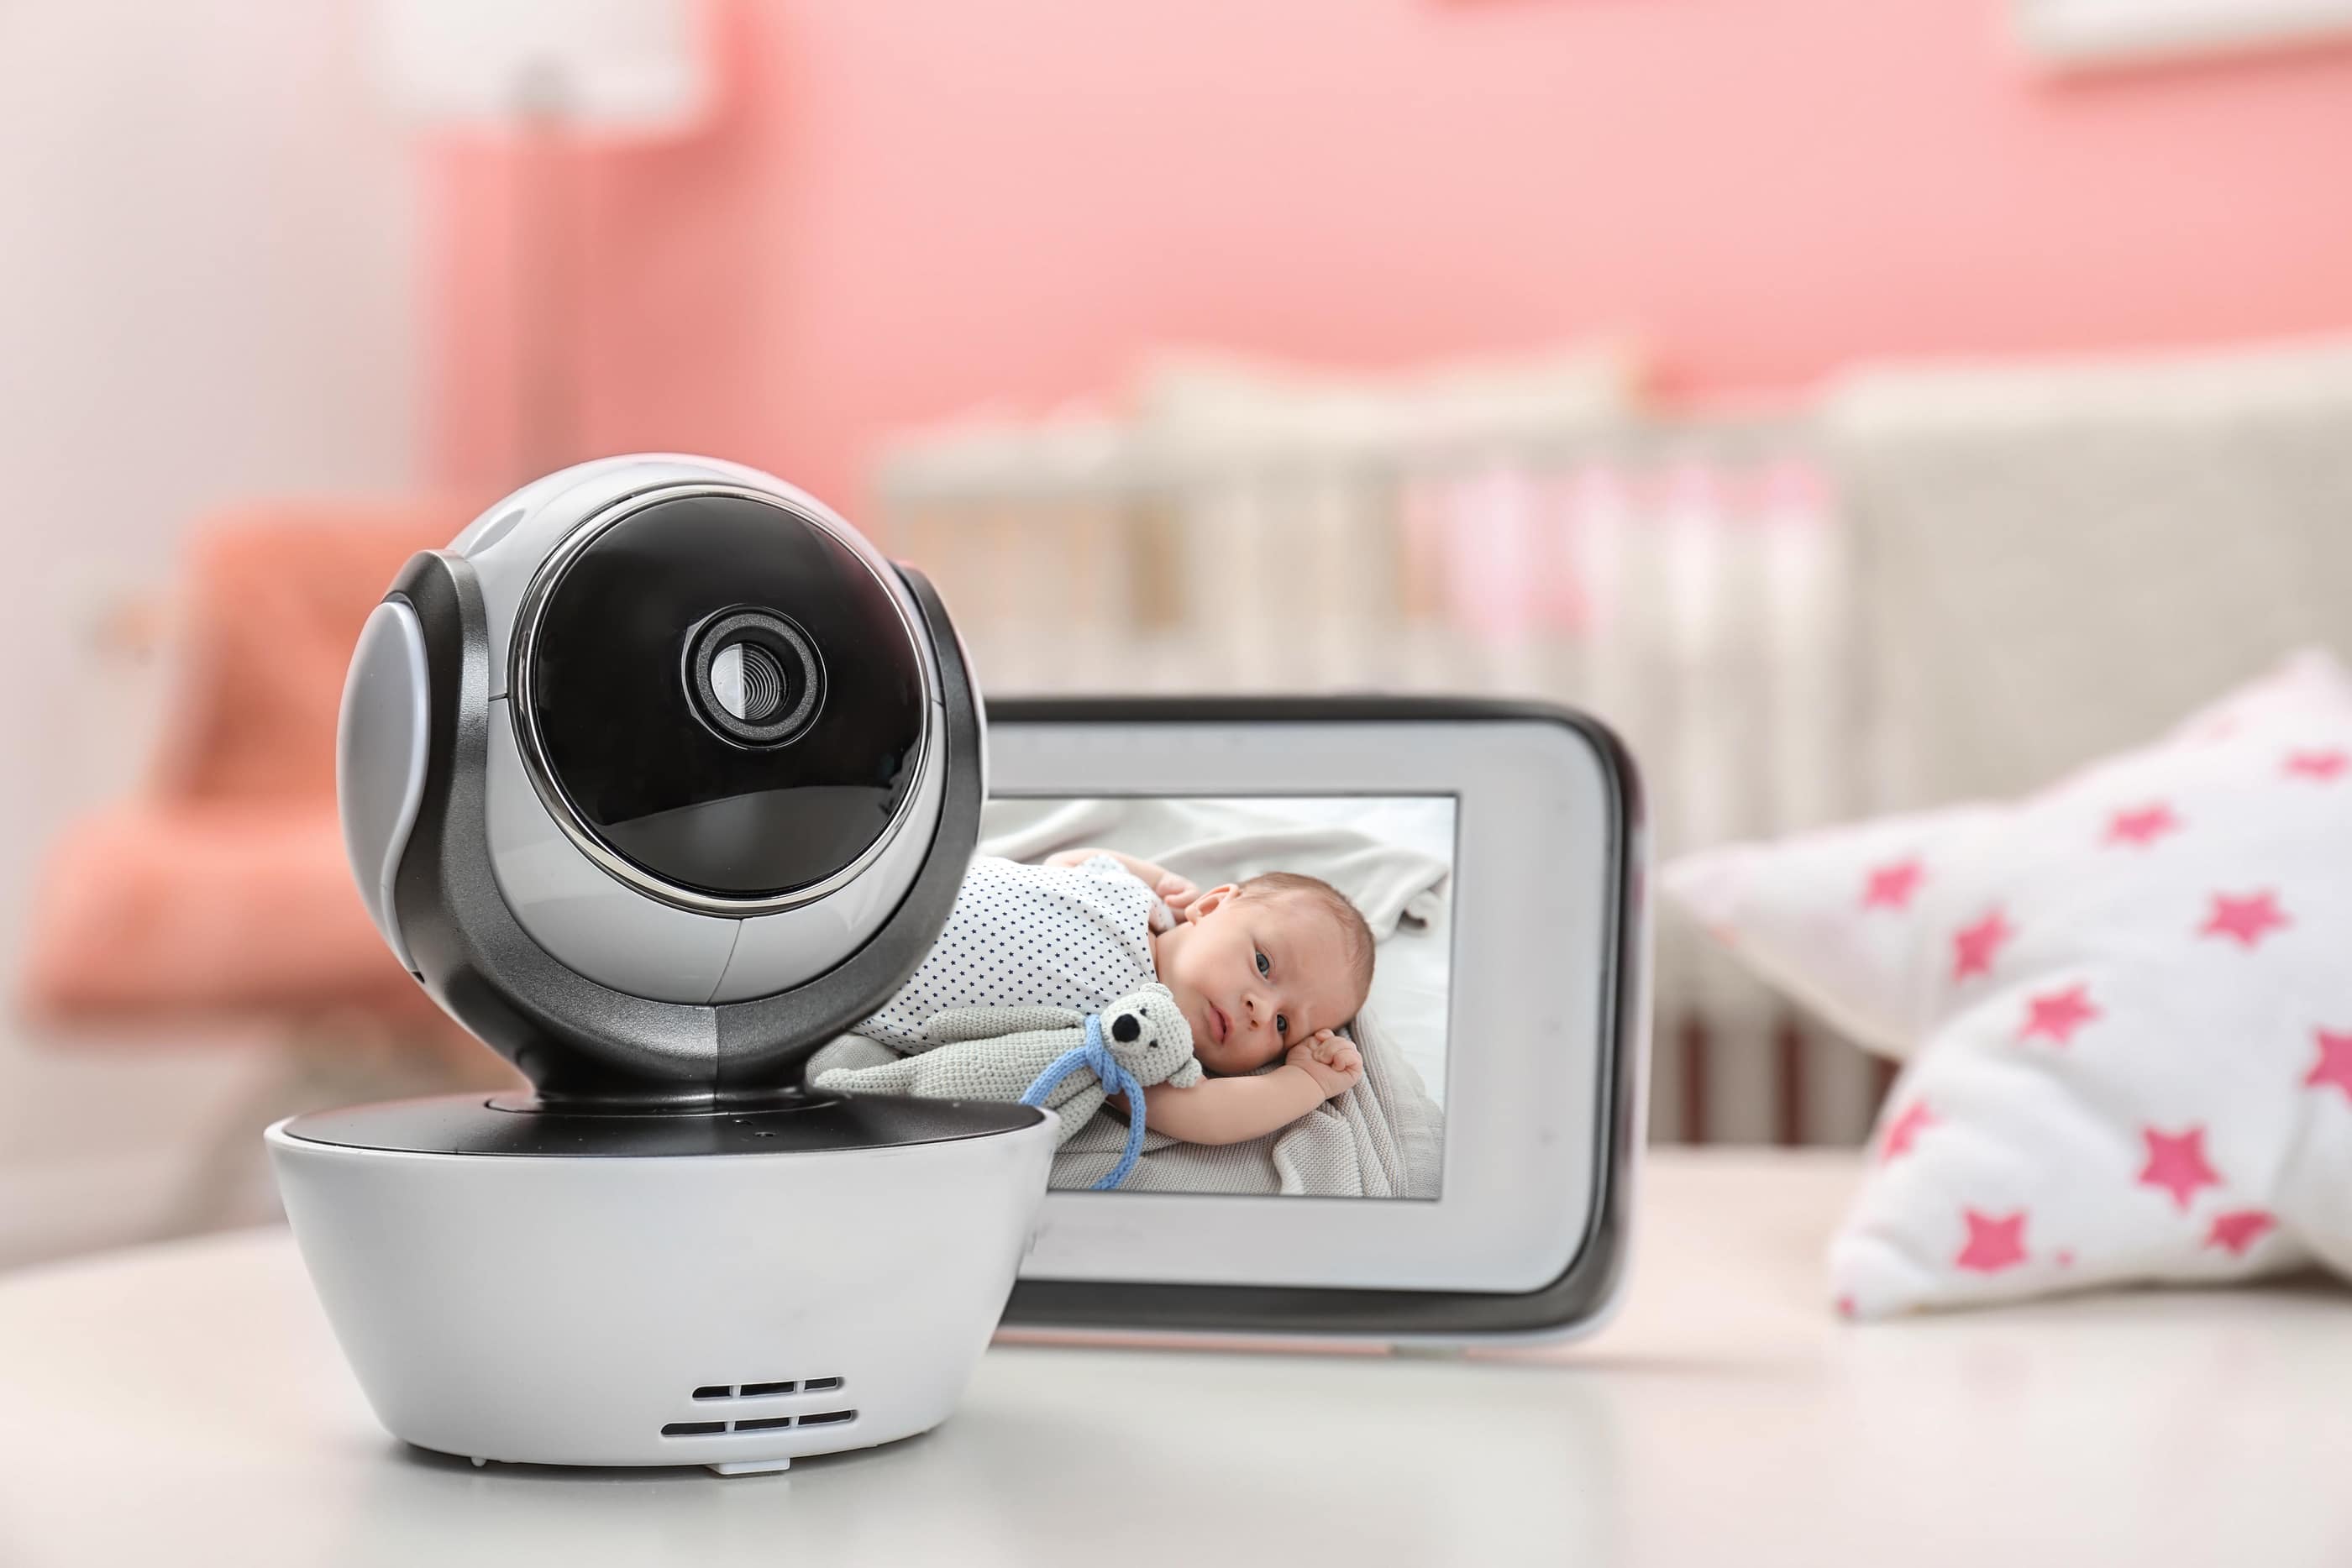 Baby Monitors On Table In Room. Cctv Equipment